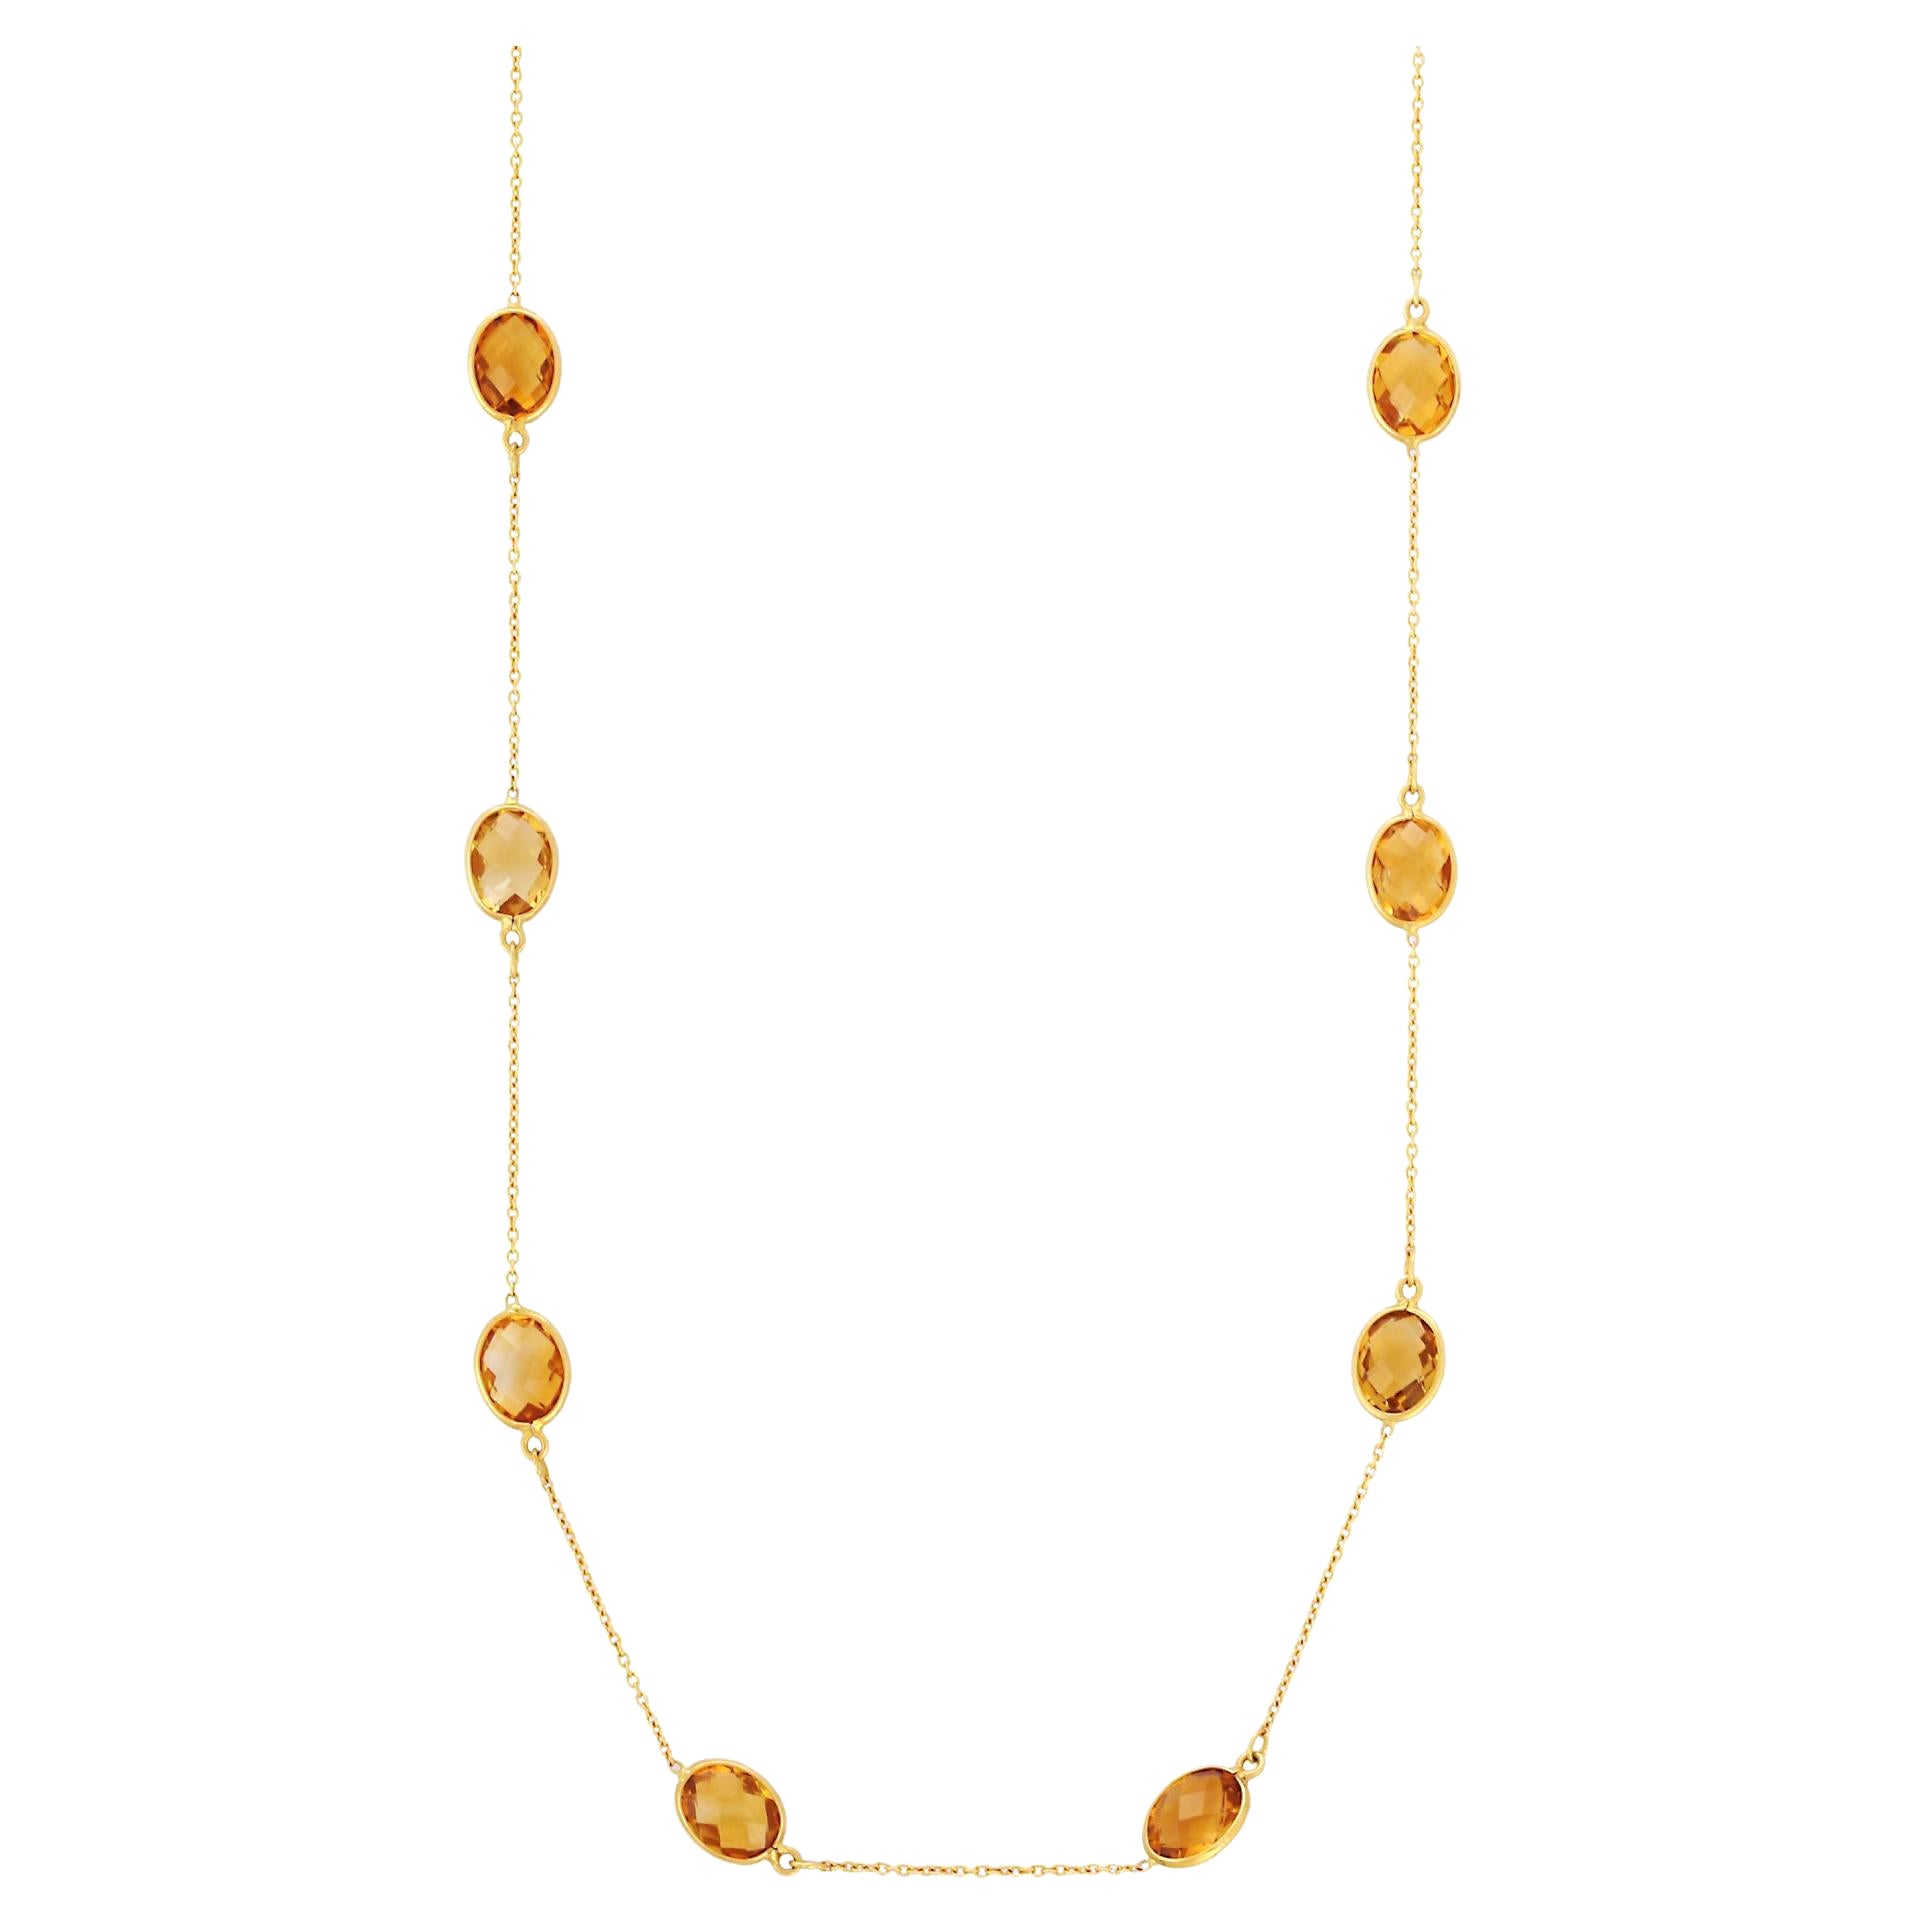 18k Yellow Gold Delicate 17.5 Ct Oval Cut Citrine Chain Necklace